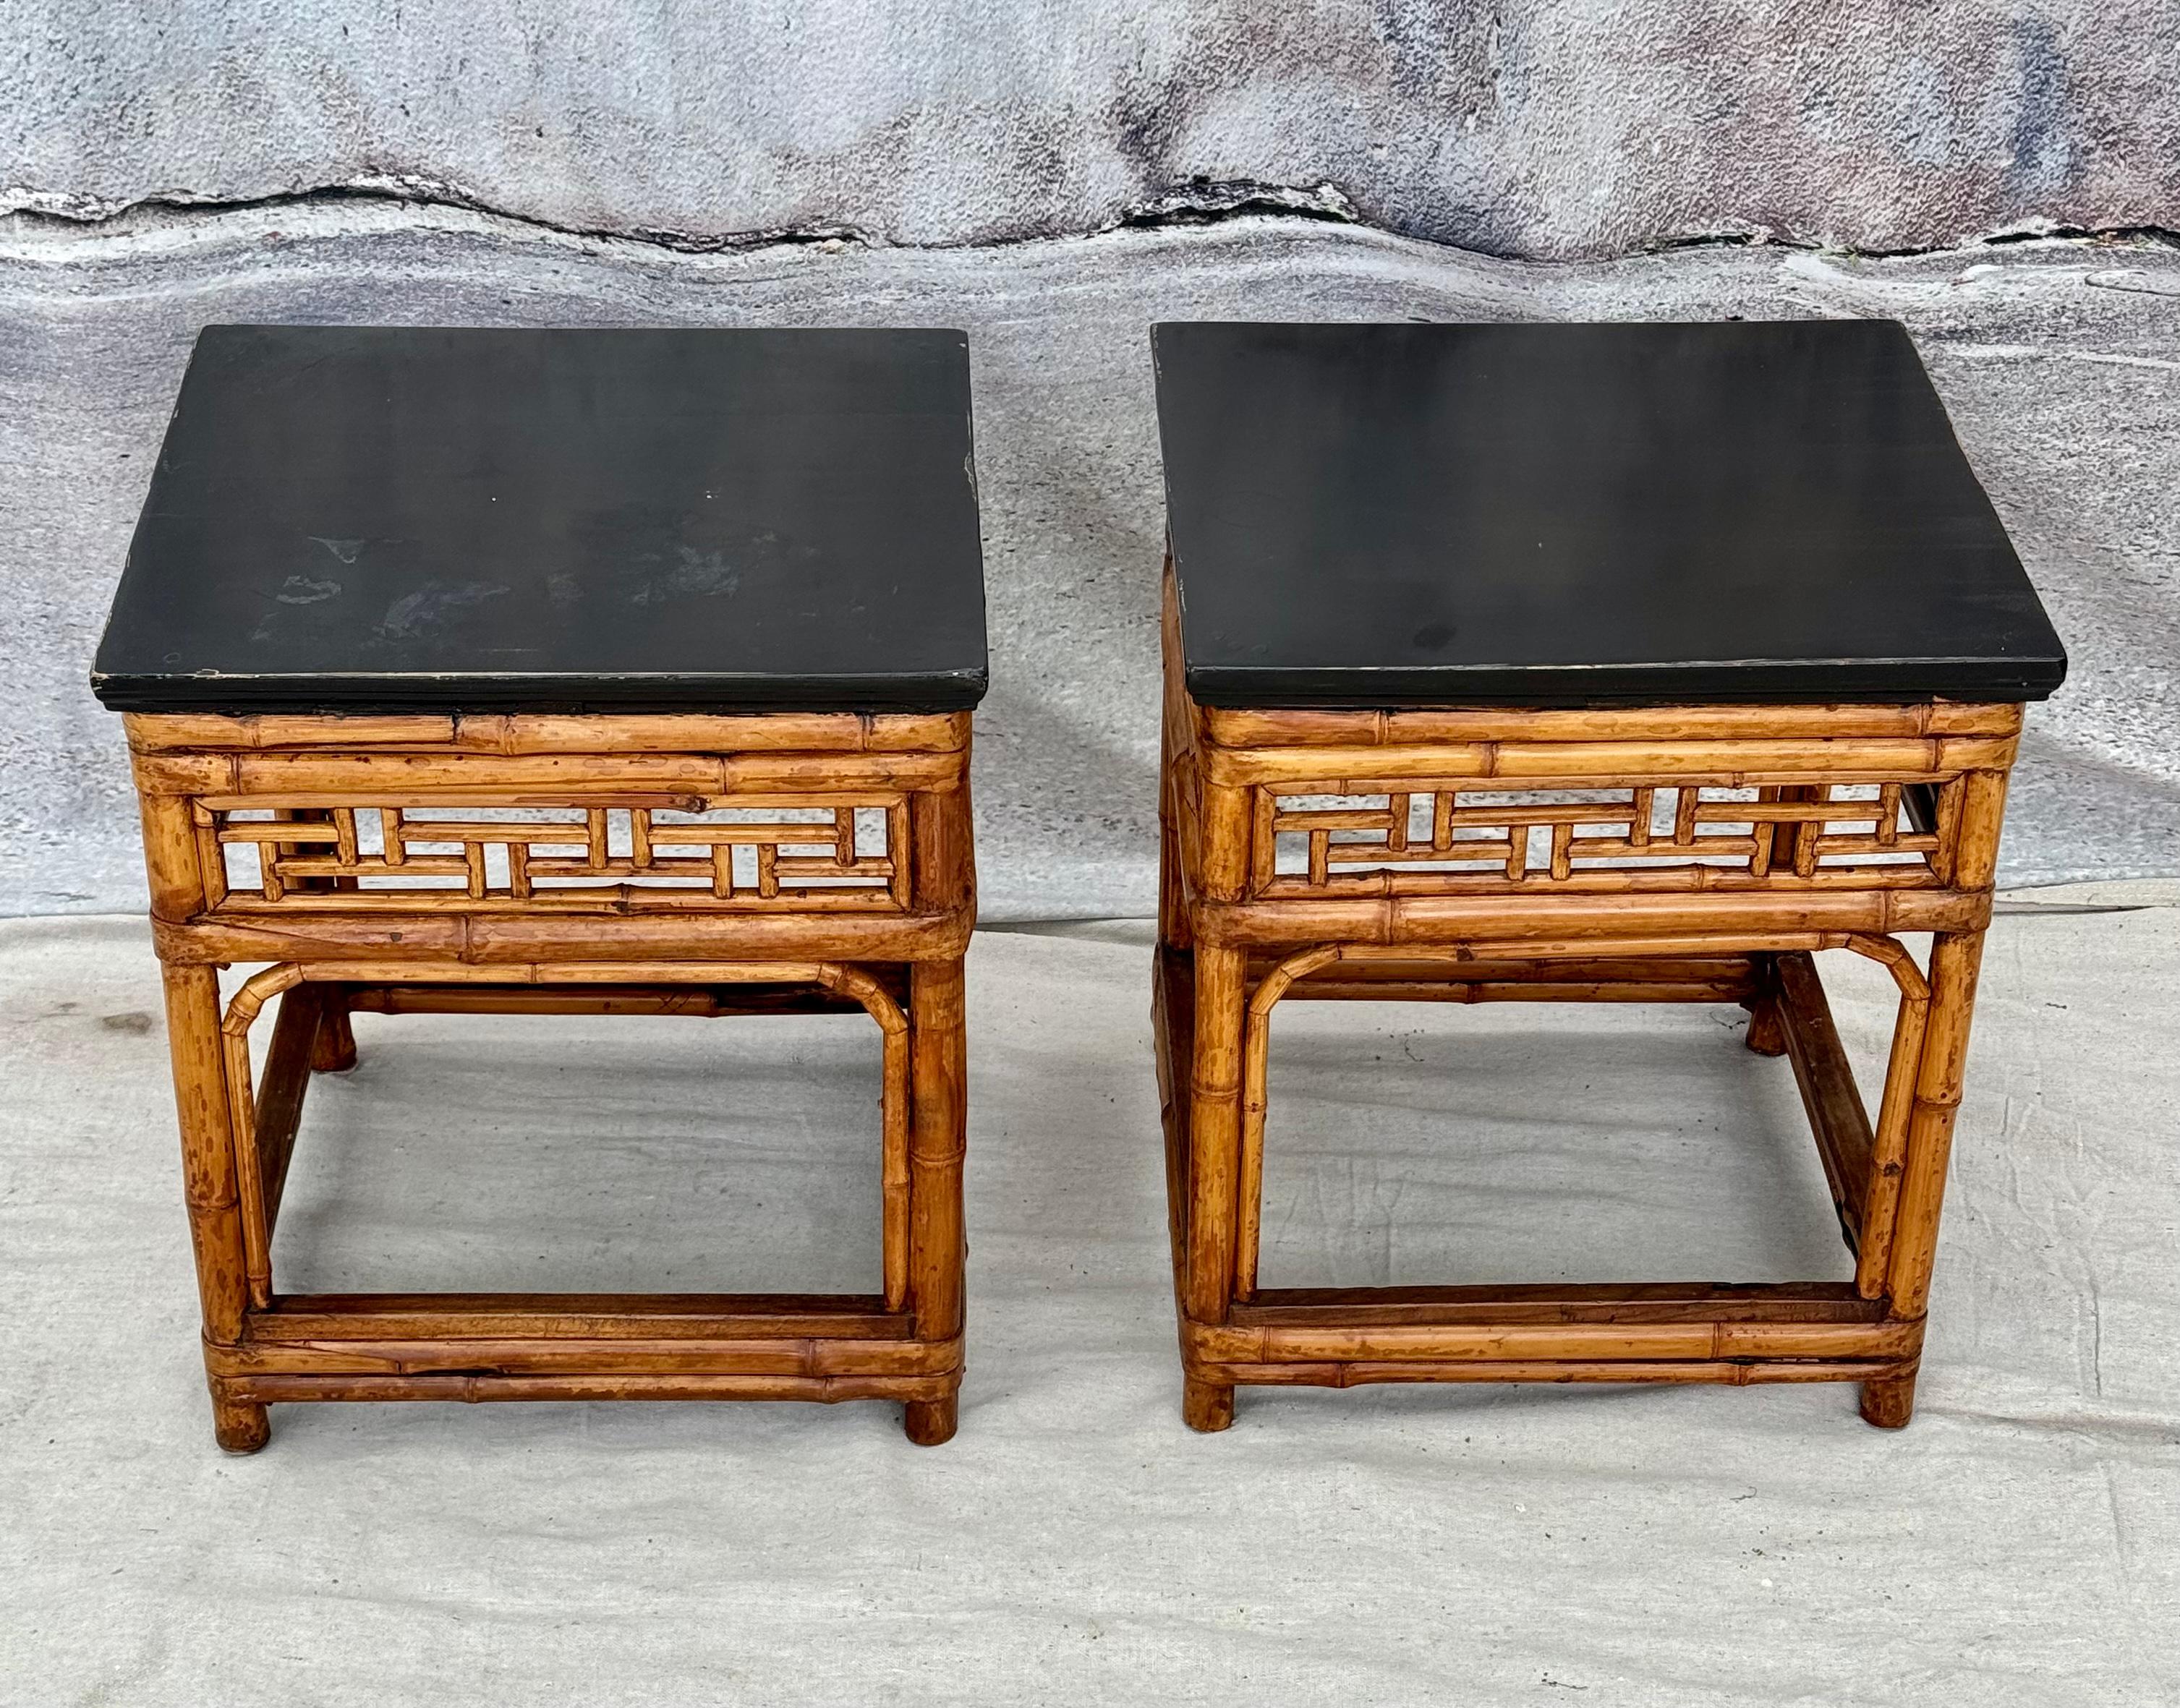 A Pair of Chinese Export Ebonized Top Bamboo Side Tables  In Good Condition For Sale In Bradenton, FL